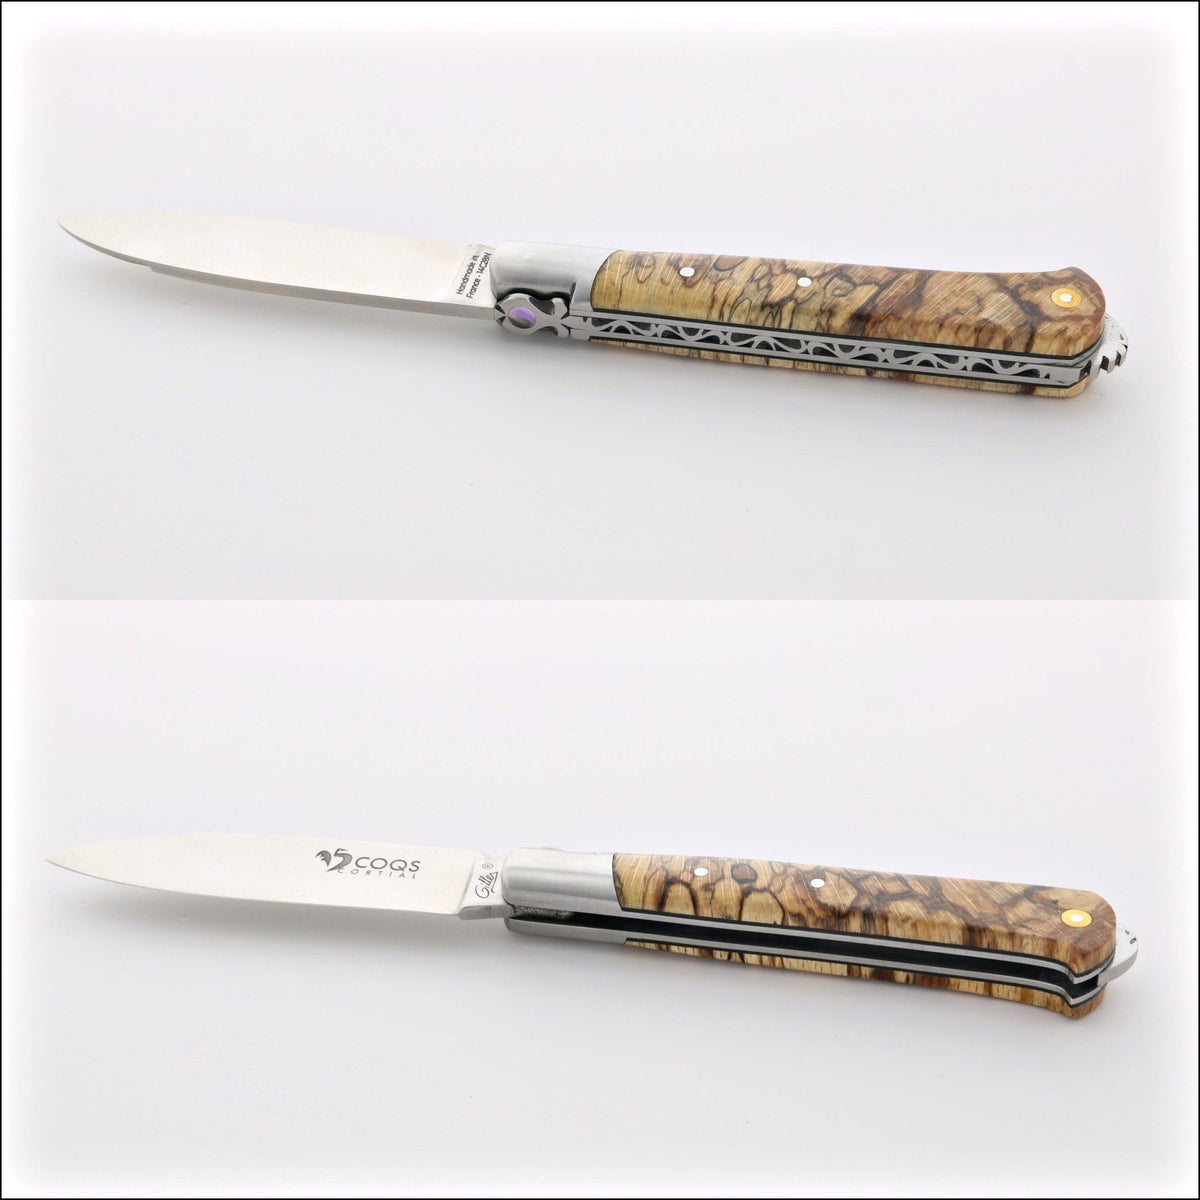 5 Coqs Pocket Knife - Burled Beech End Grain &amp; Mother of Pearl Inlay